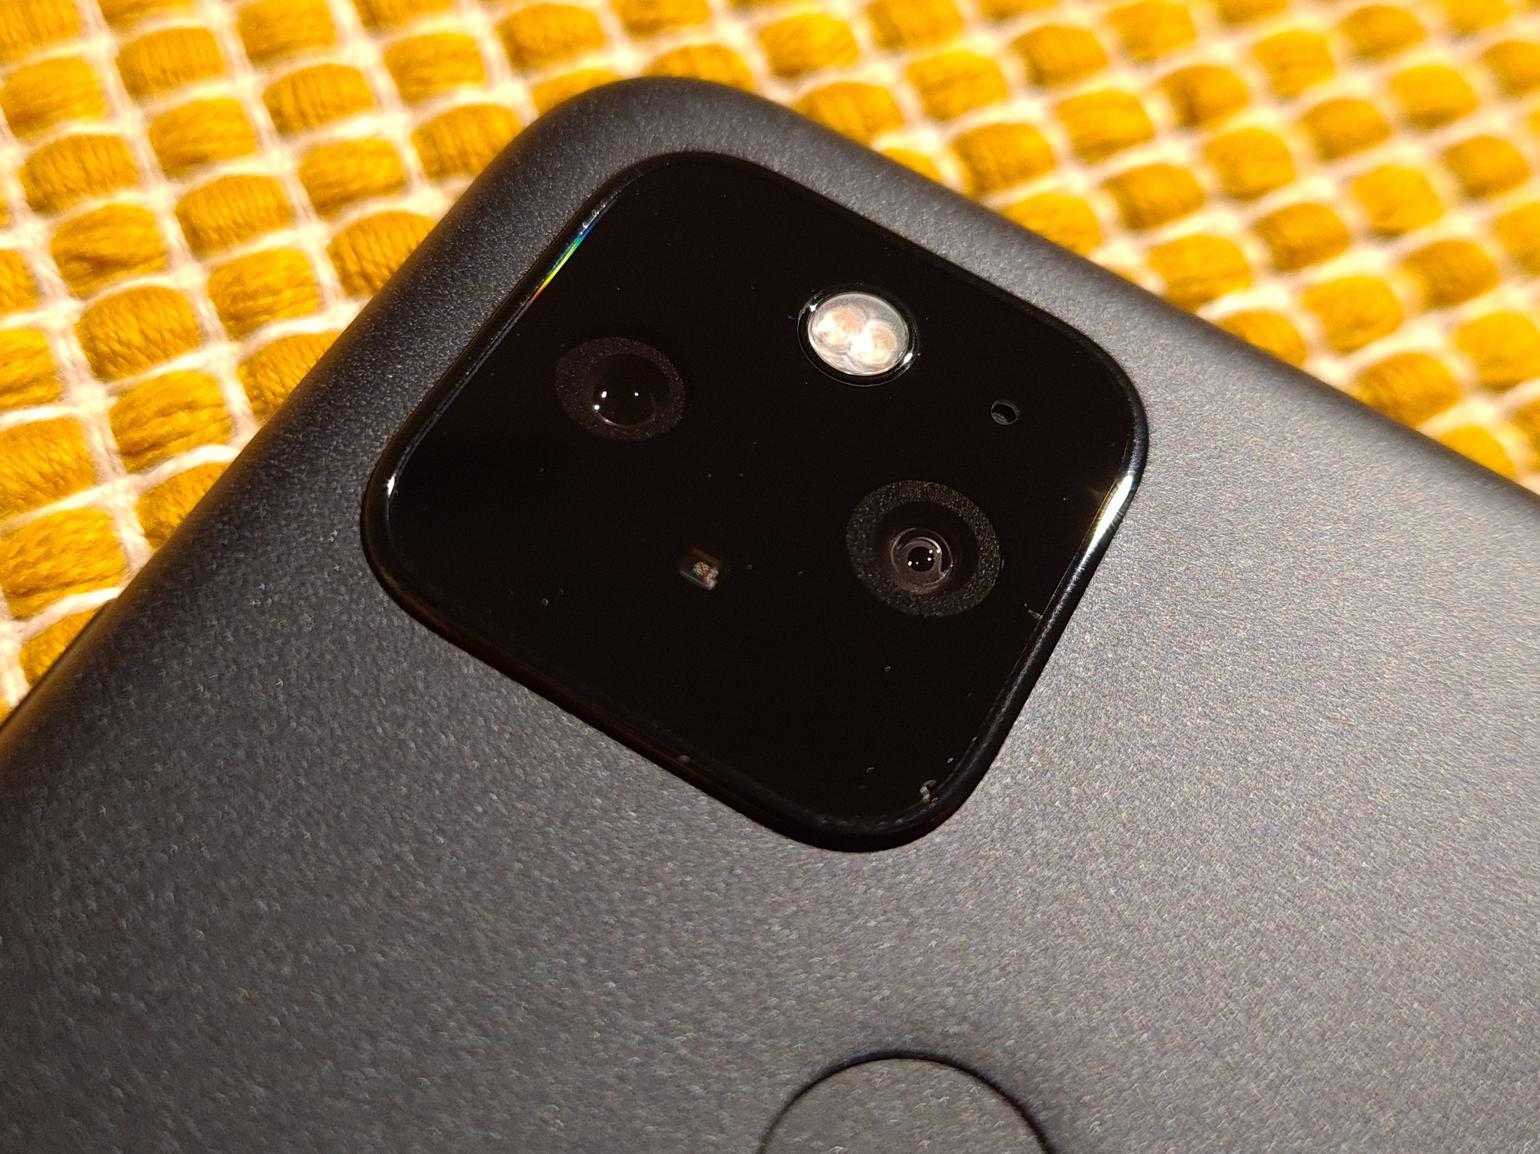 GOOGLE PIXEL 5 CAMERA: PICTURE THIS